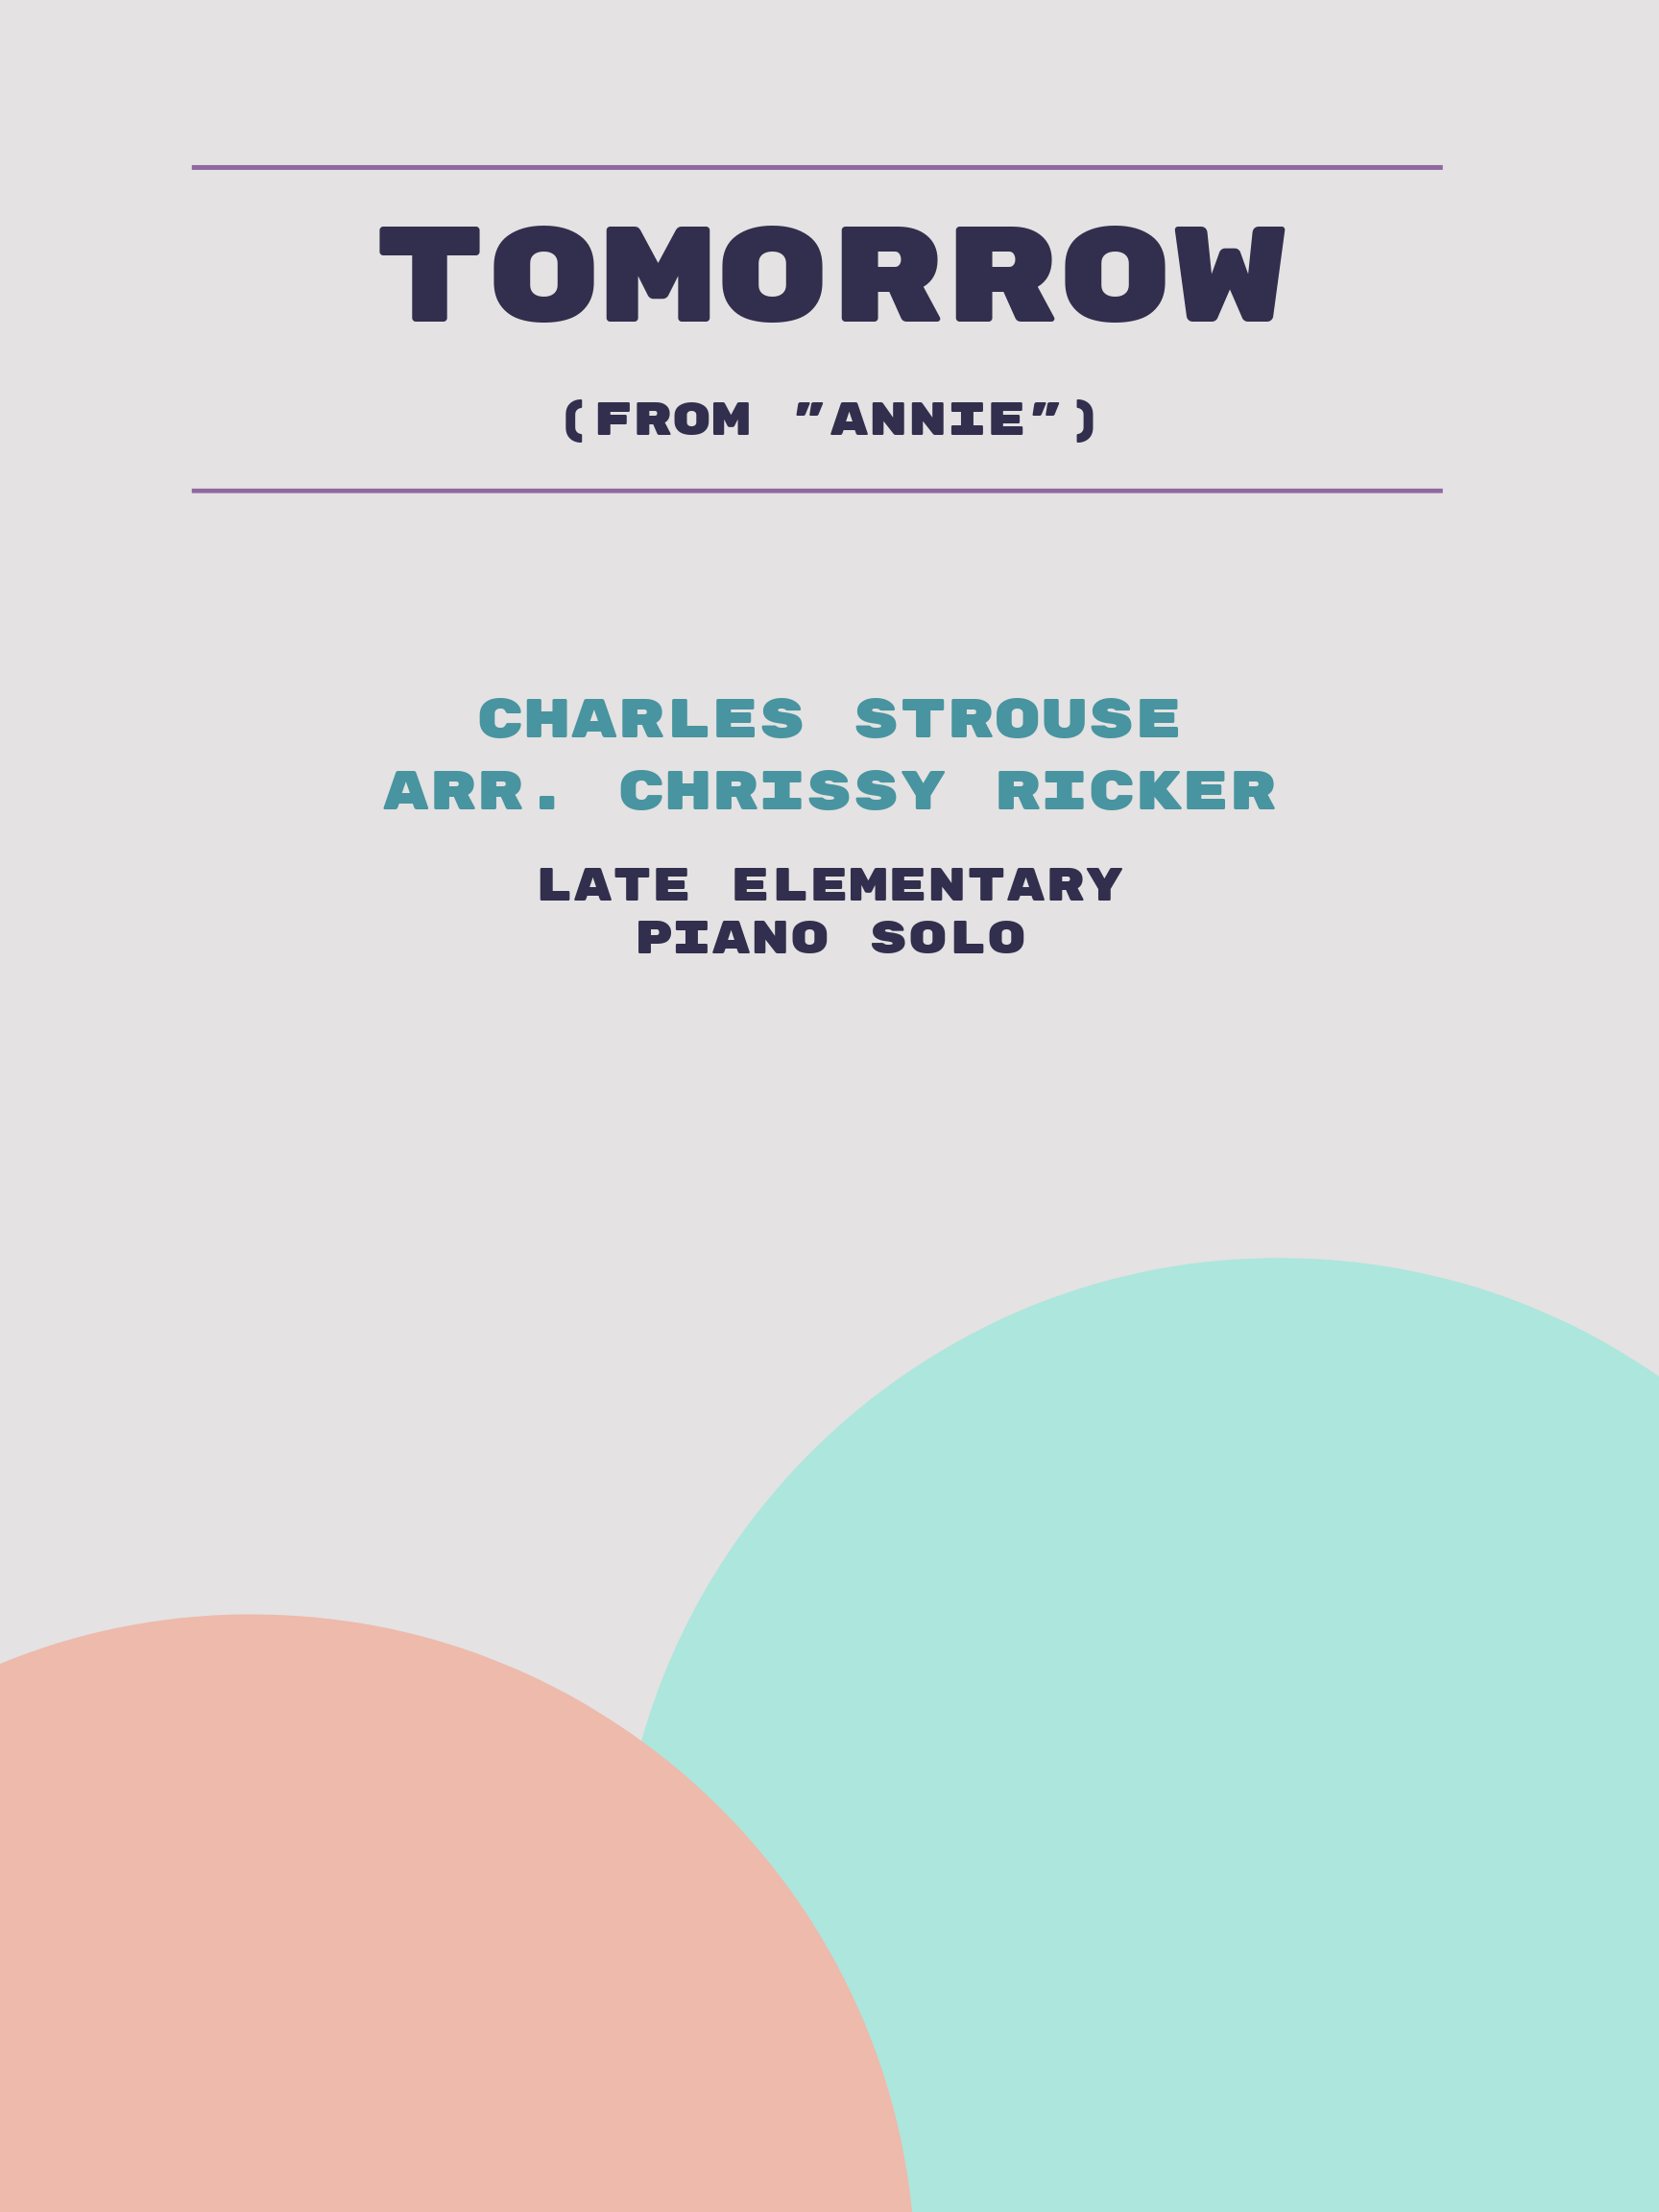 Tomorrow by Charles Strouse